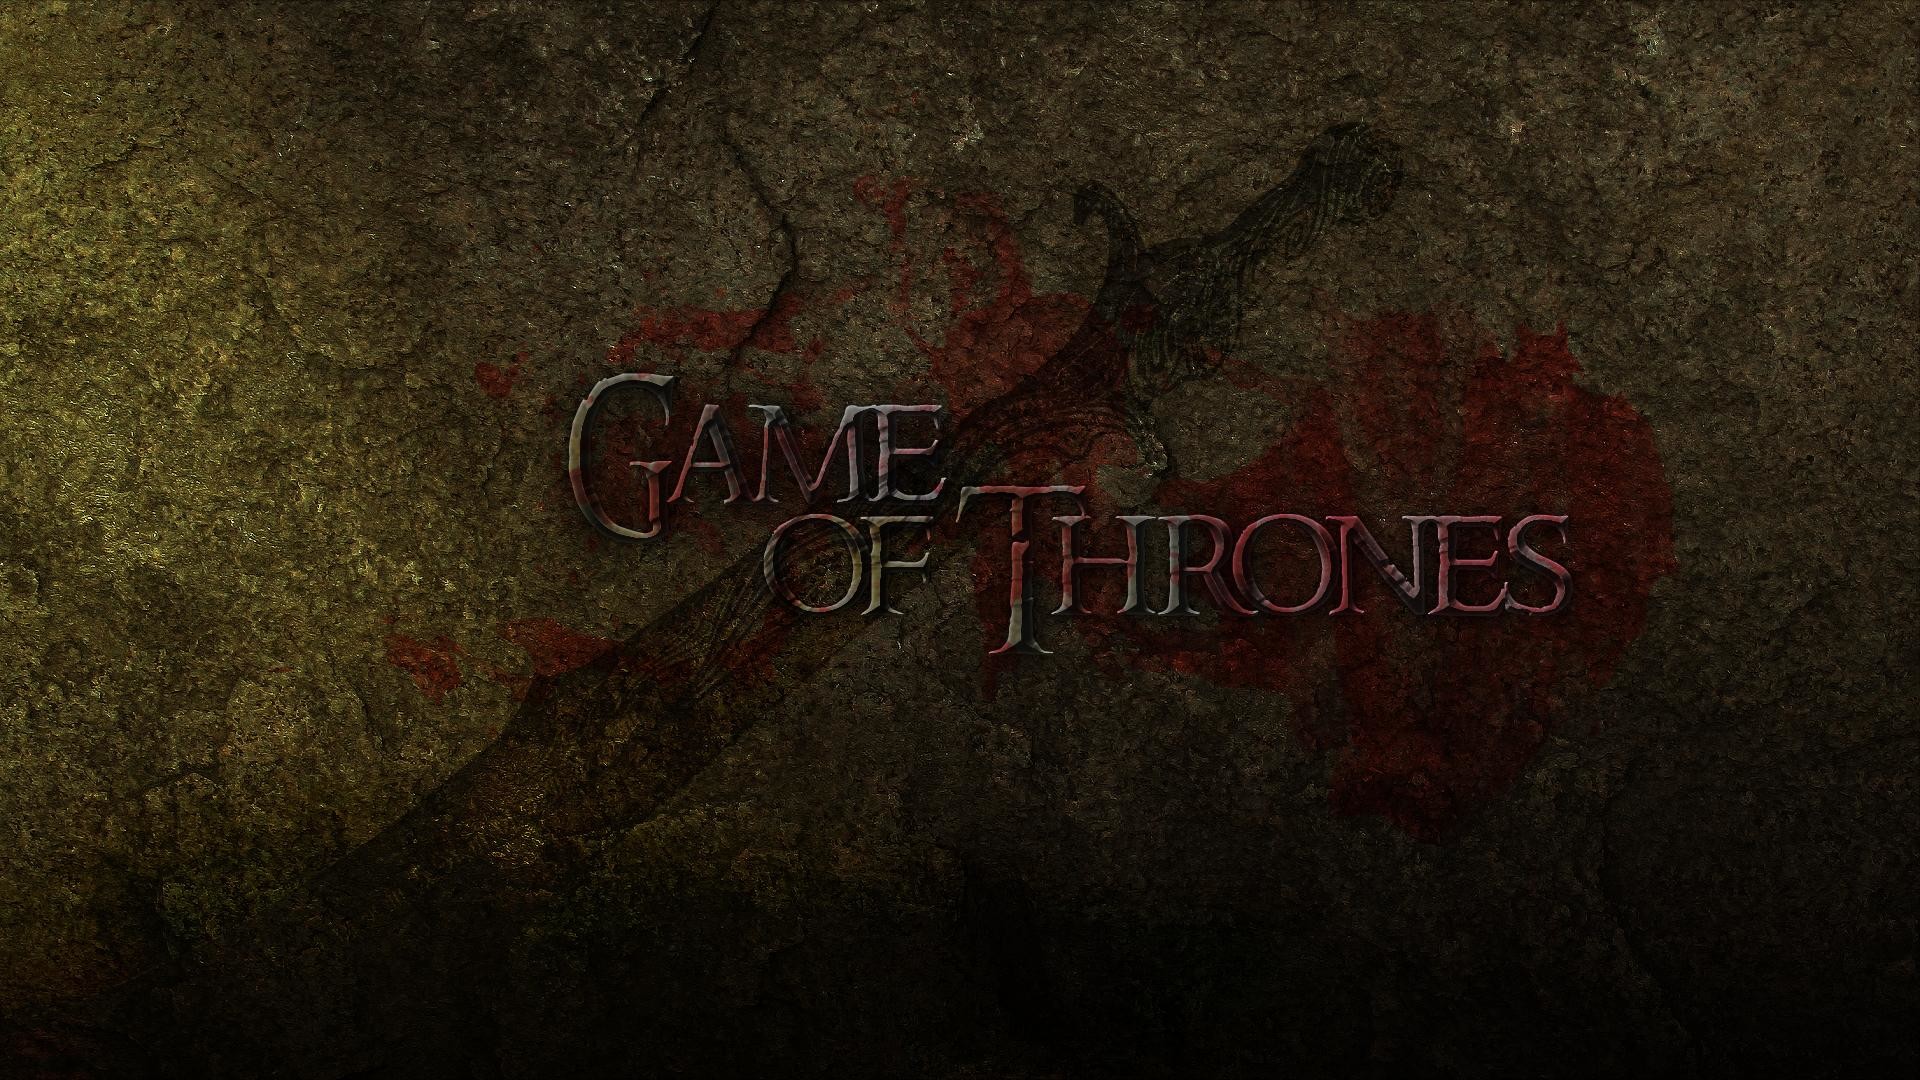 Movies 10801 1920x game thrones background